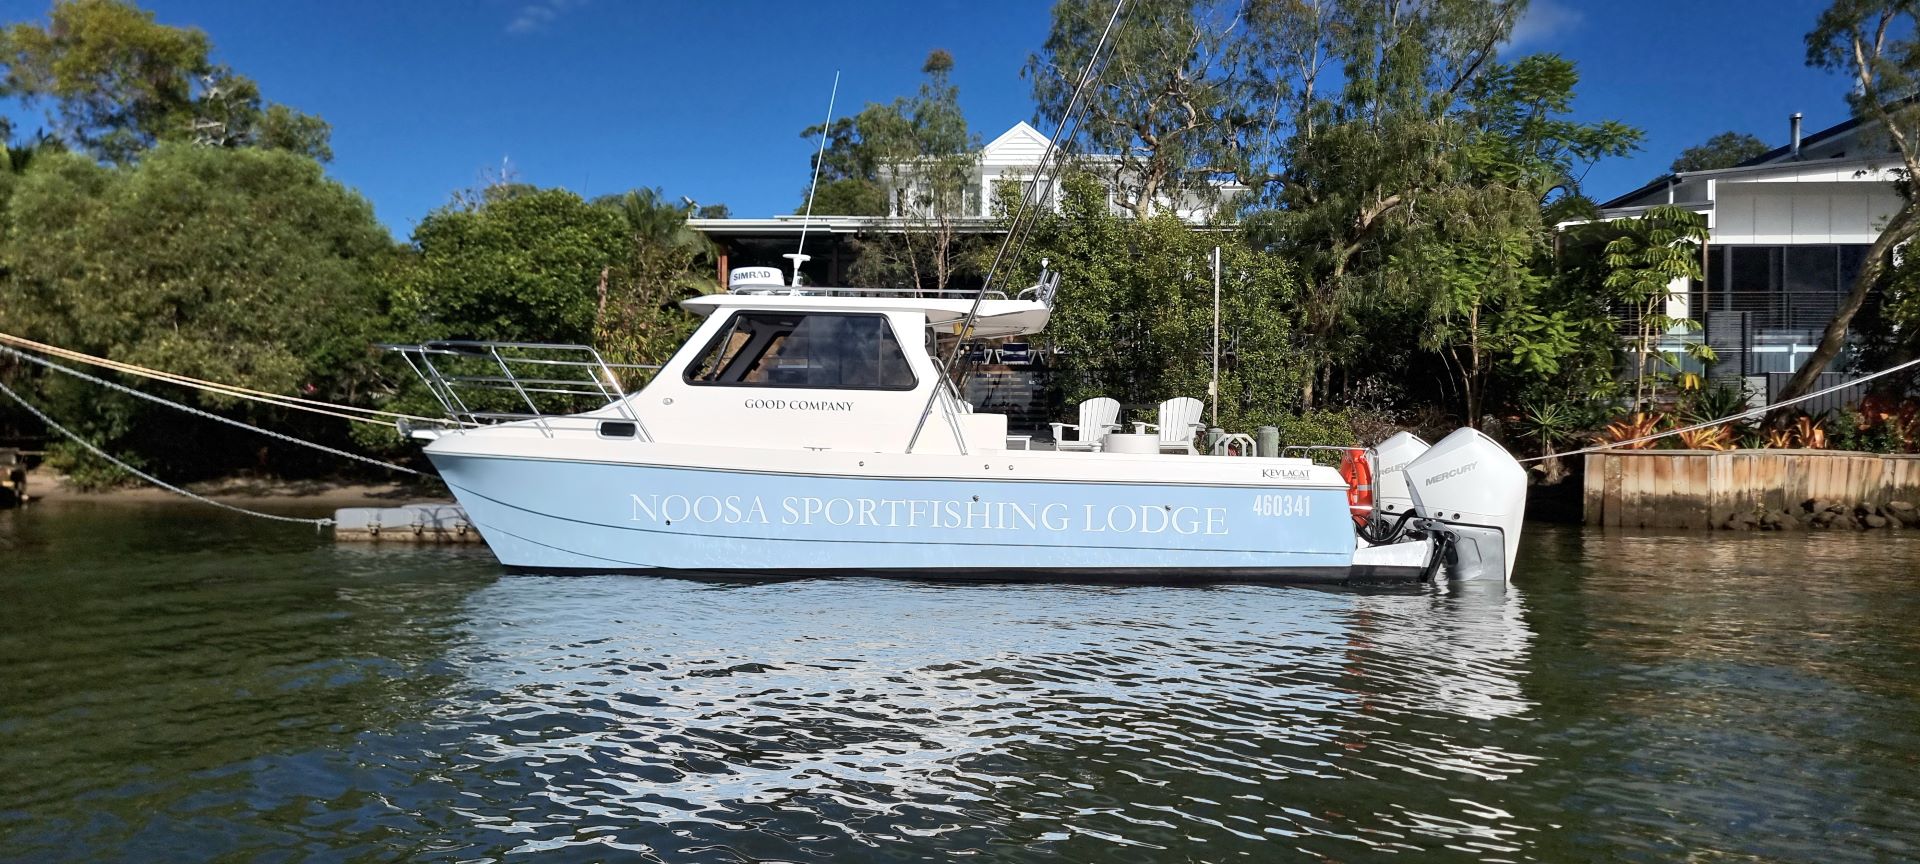 3/4 Day Private Charter